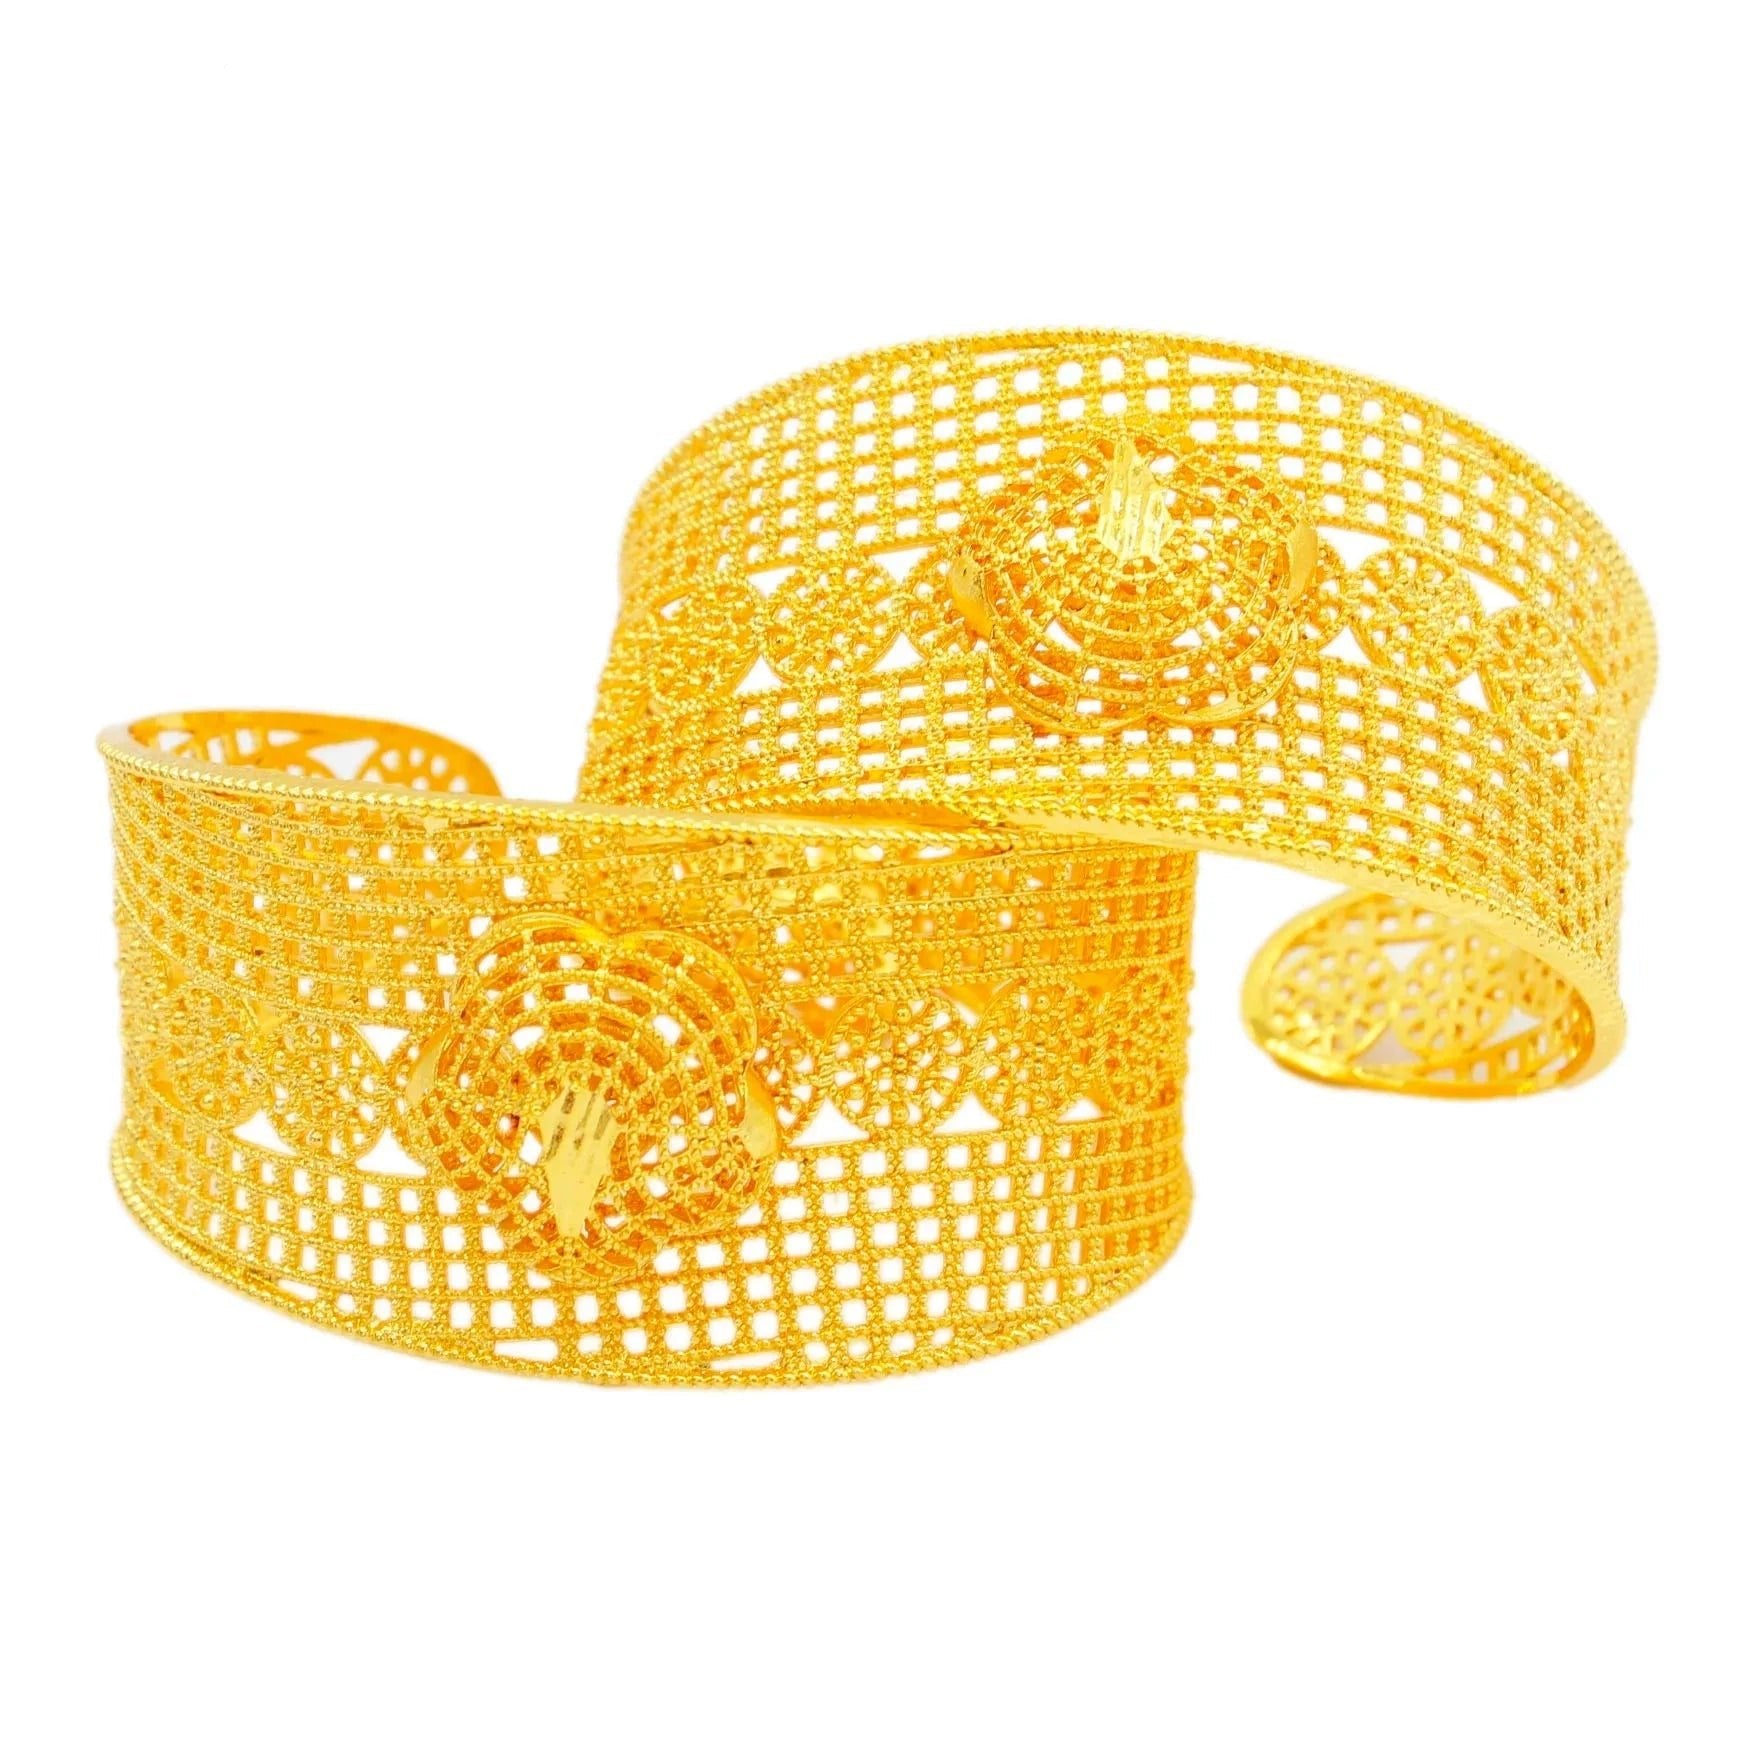 Cuff Bracelets for Women Girls Bangle Jewelry African Gold Color Bangle - Flexi Africa - Flexi Africa offers Free Delivery Worldwide - Vibrant African traditional clothing showcasing bold prints and intricate designs